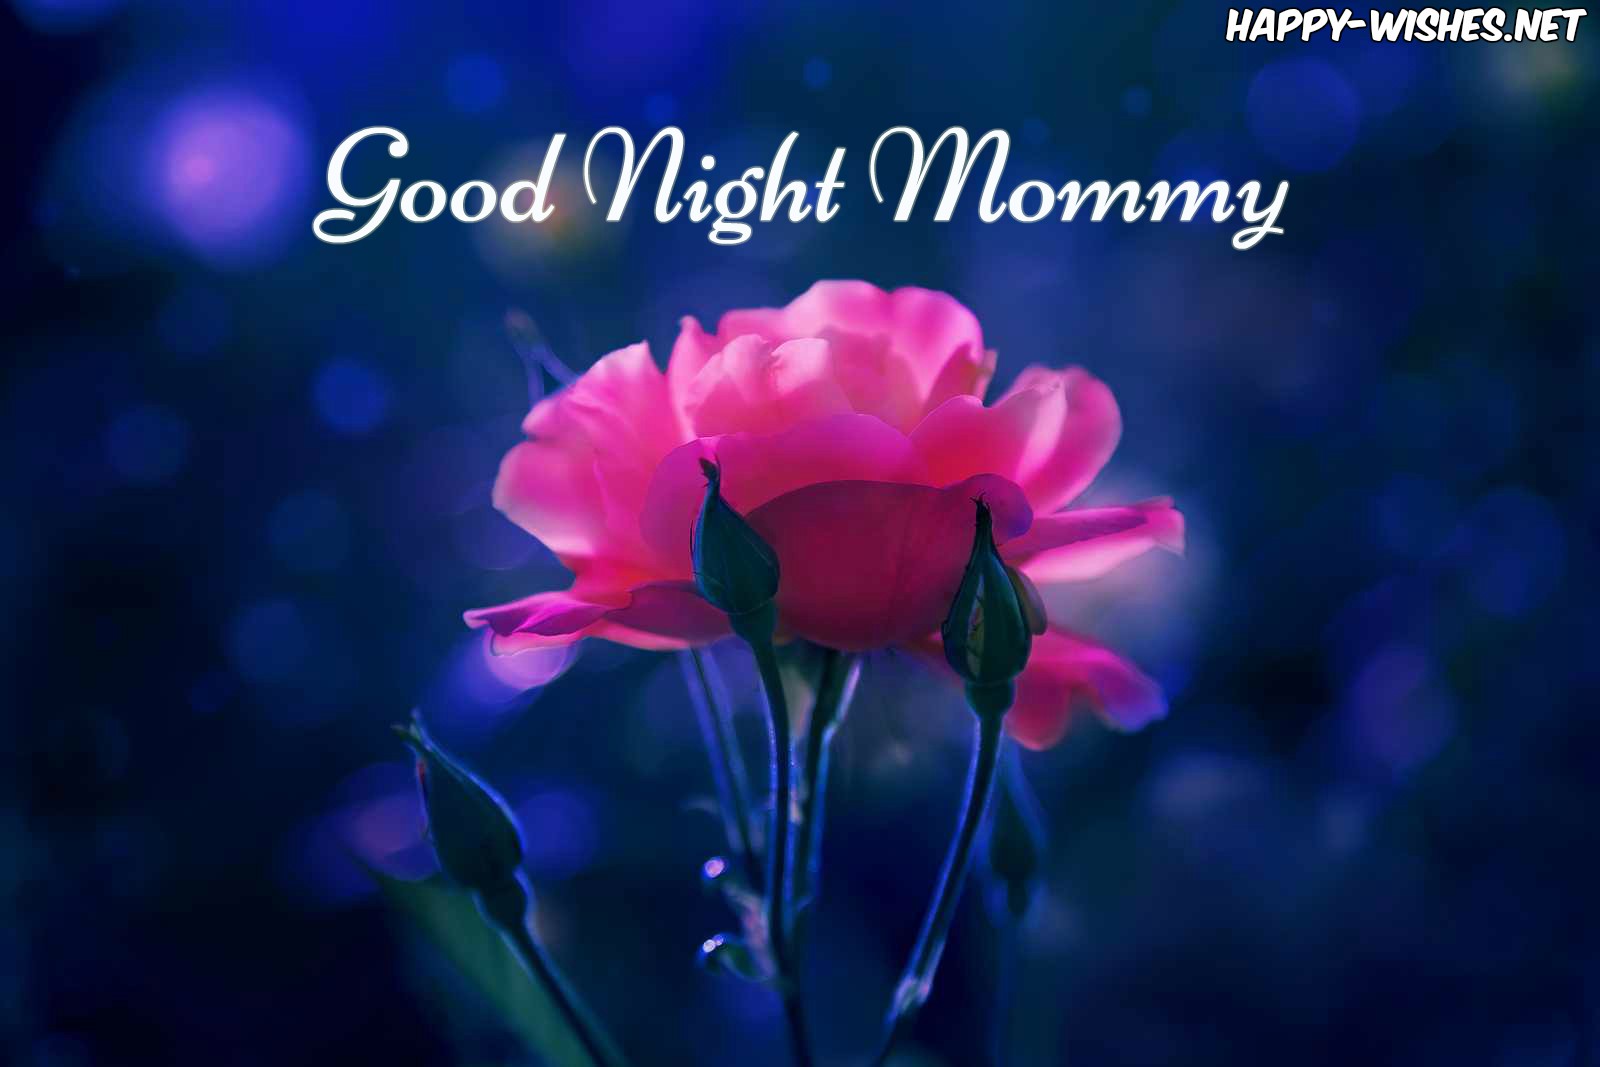 Good night mom wishes images